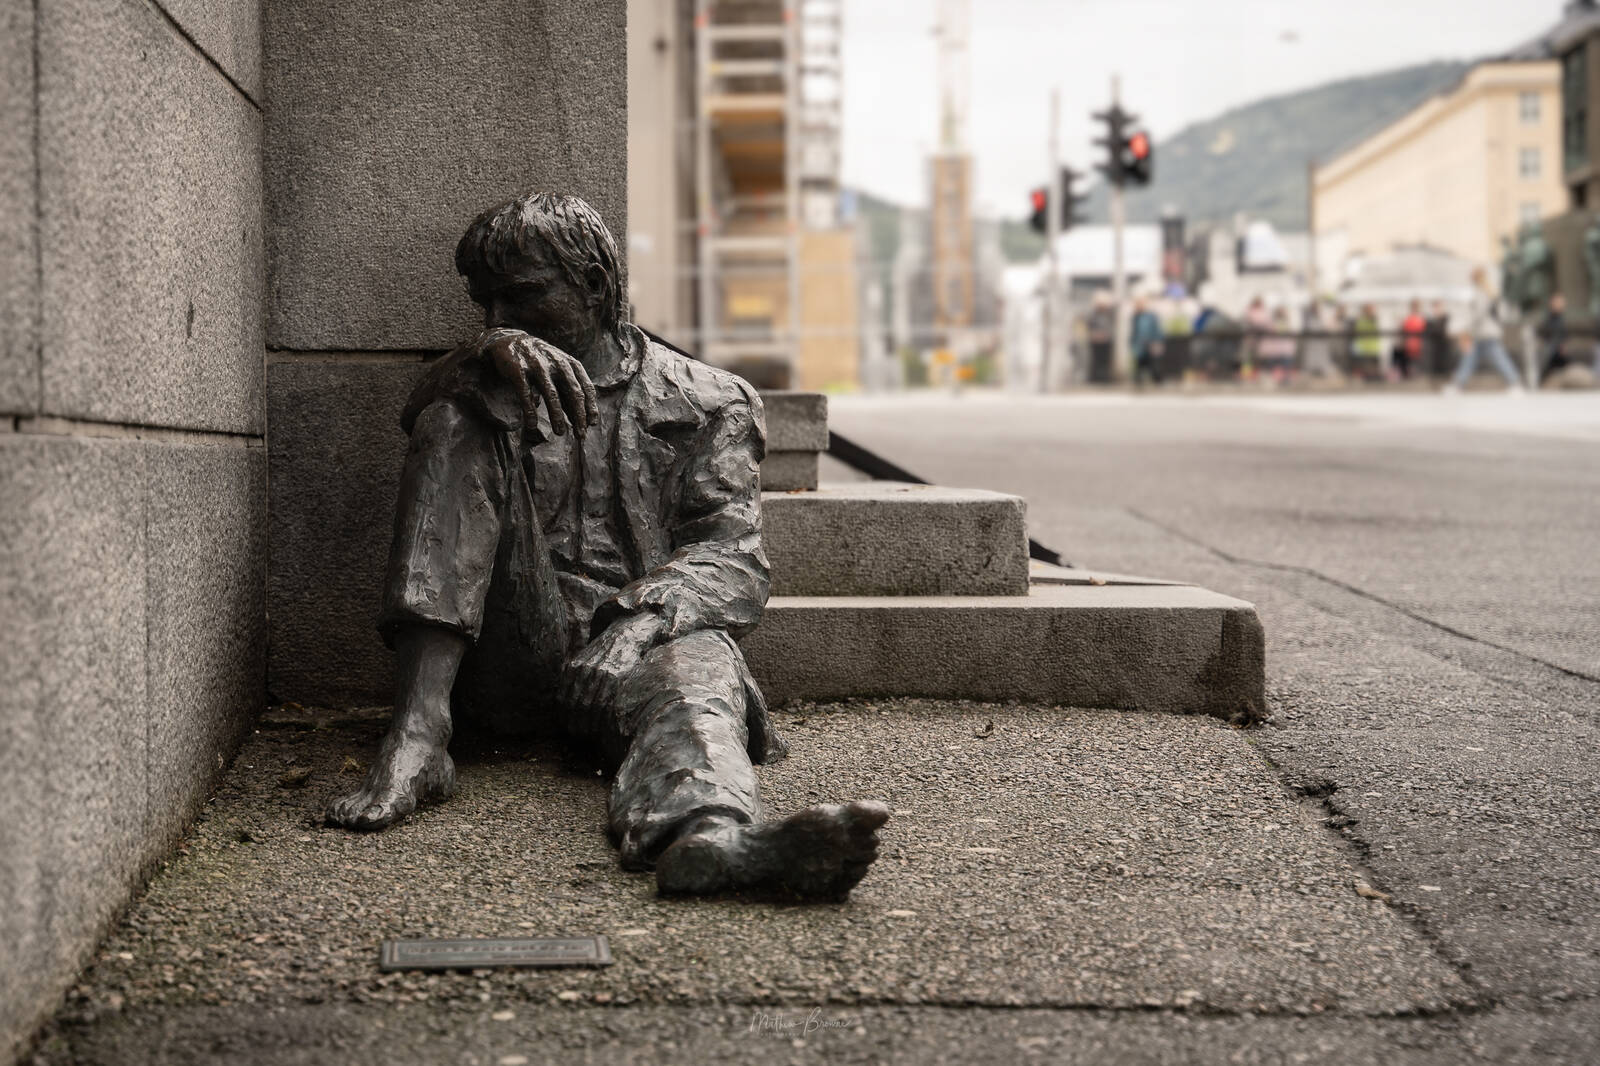 Image of The Homeless Sculpture by Mathew Browne